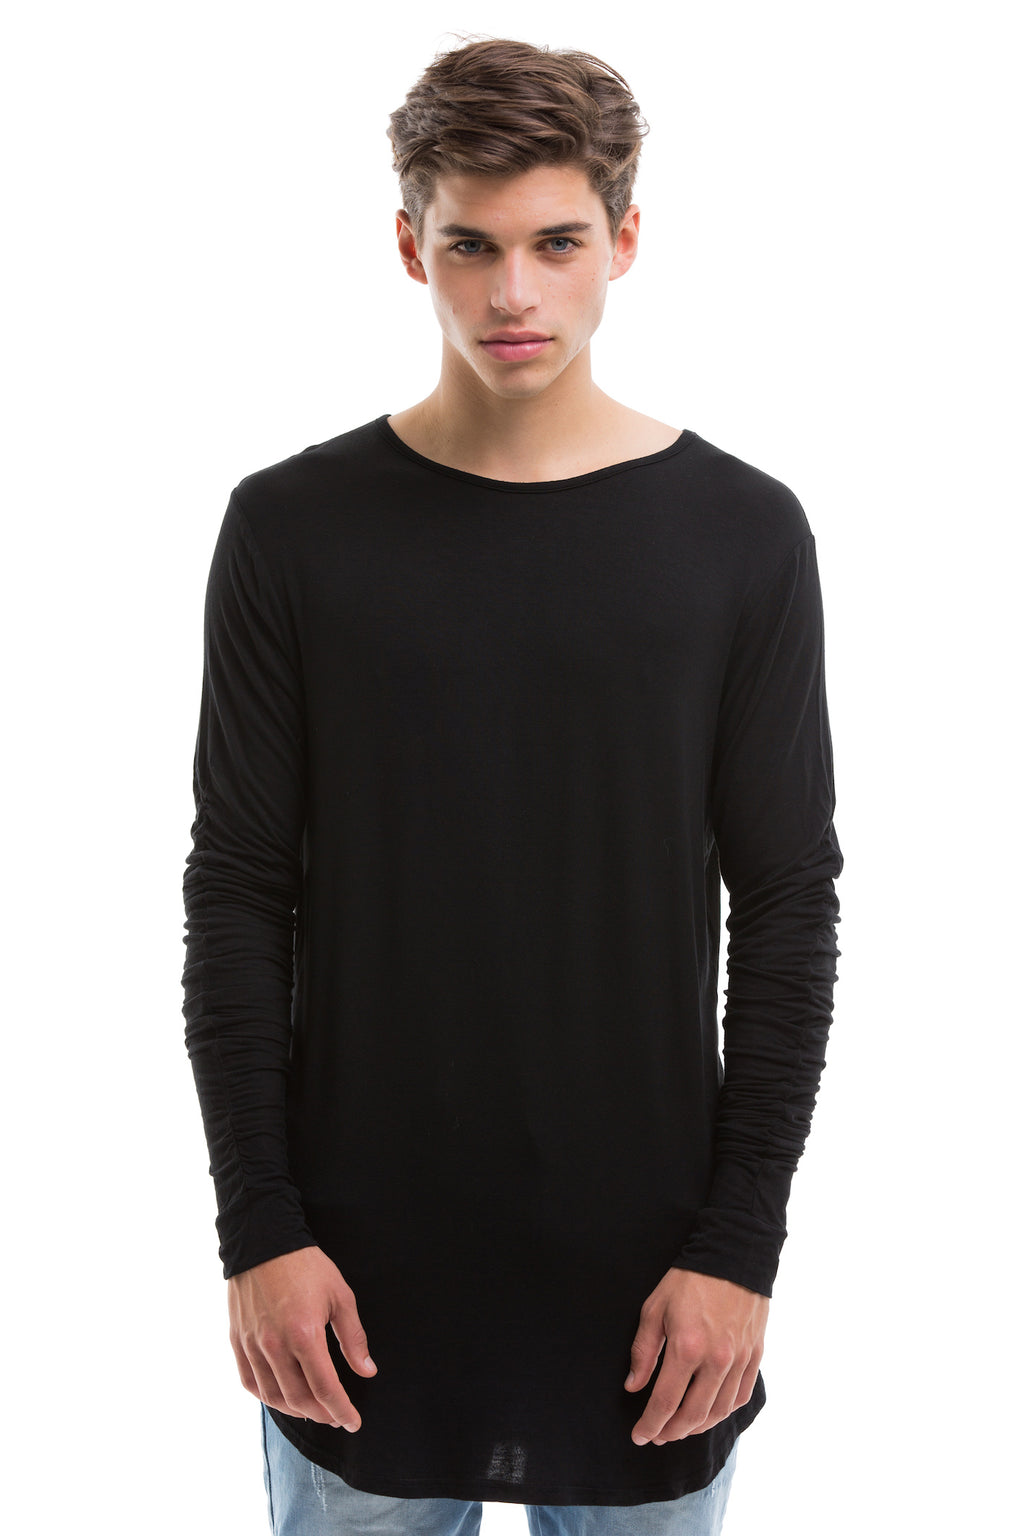 Black Scoop Cut Long Sleeve T Shirt With Double Cuffed Sleeve Ends - Front View